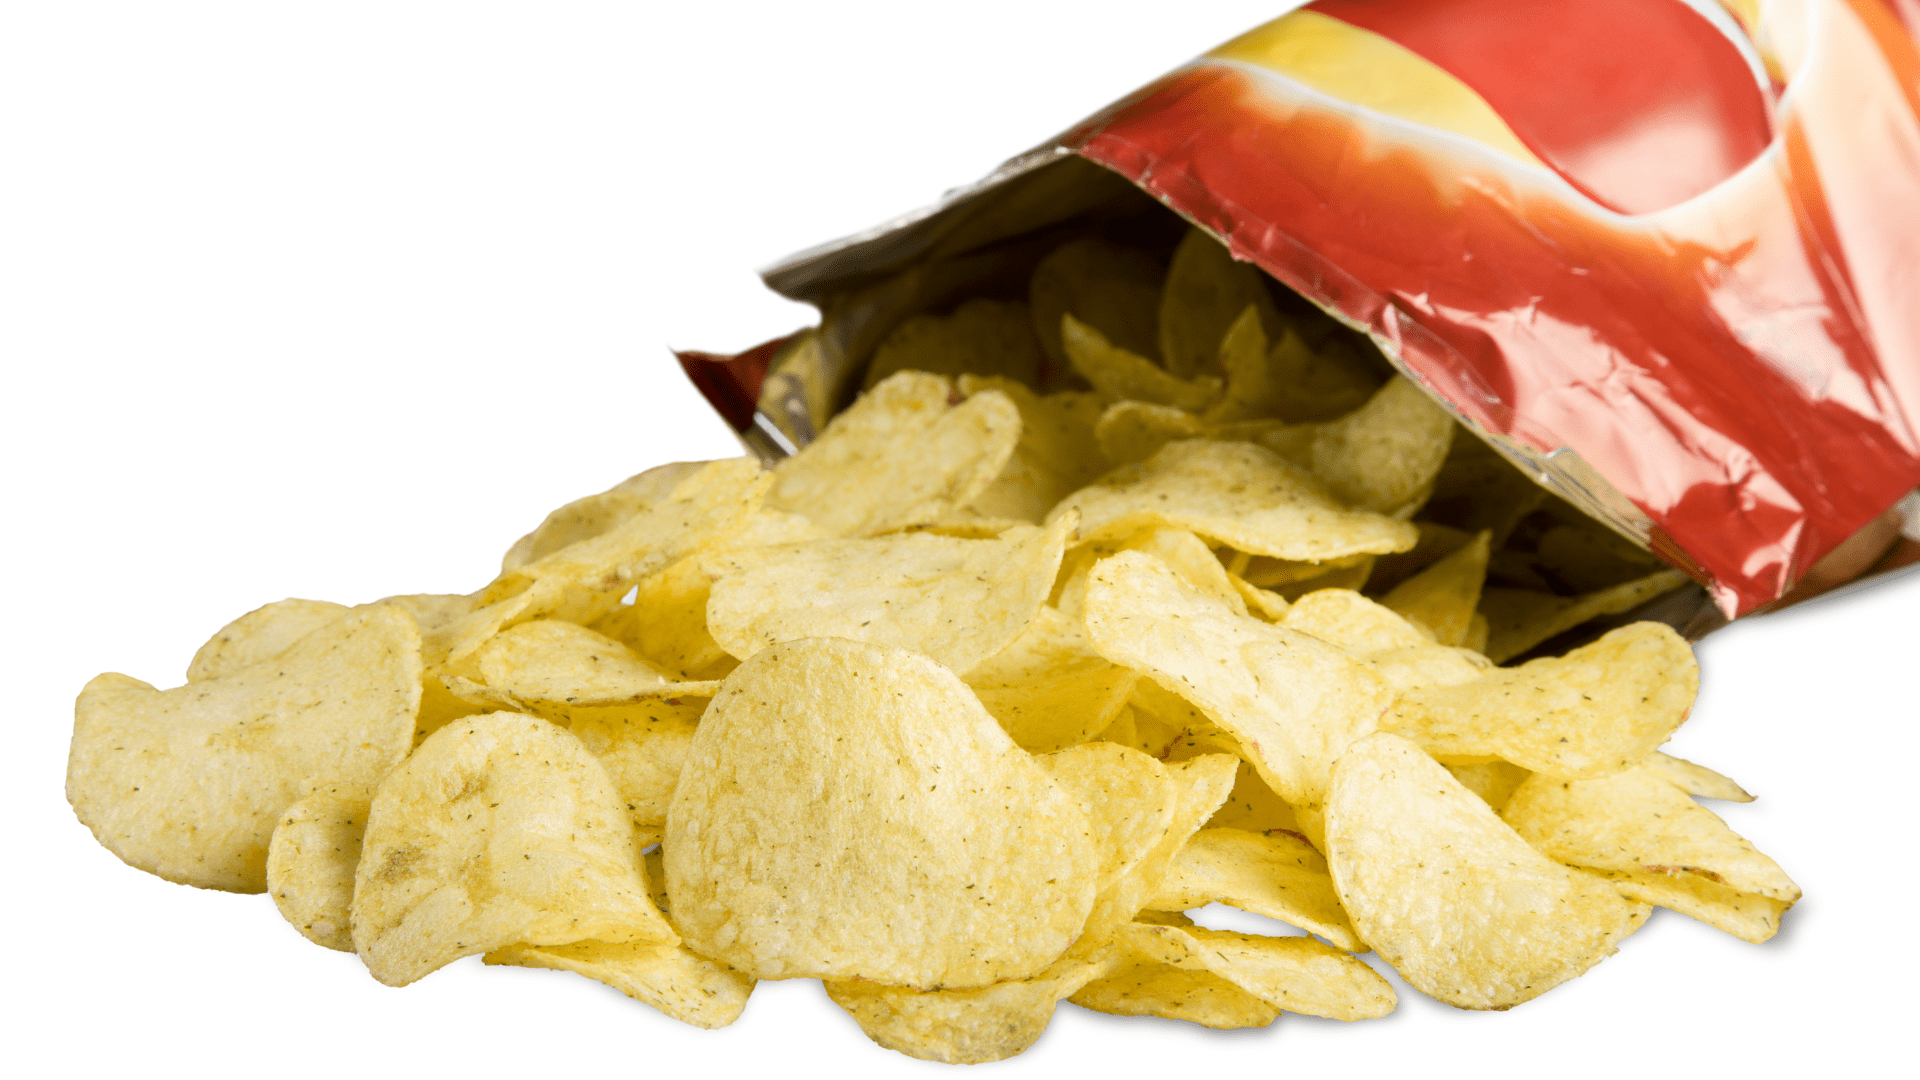 crisps out of bag - supply chain